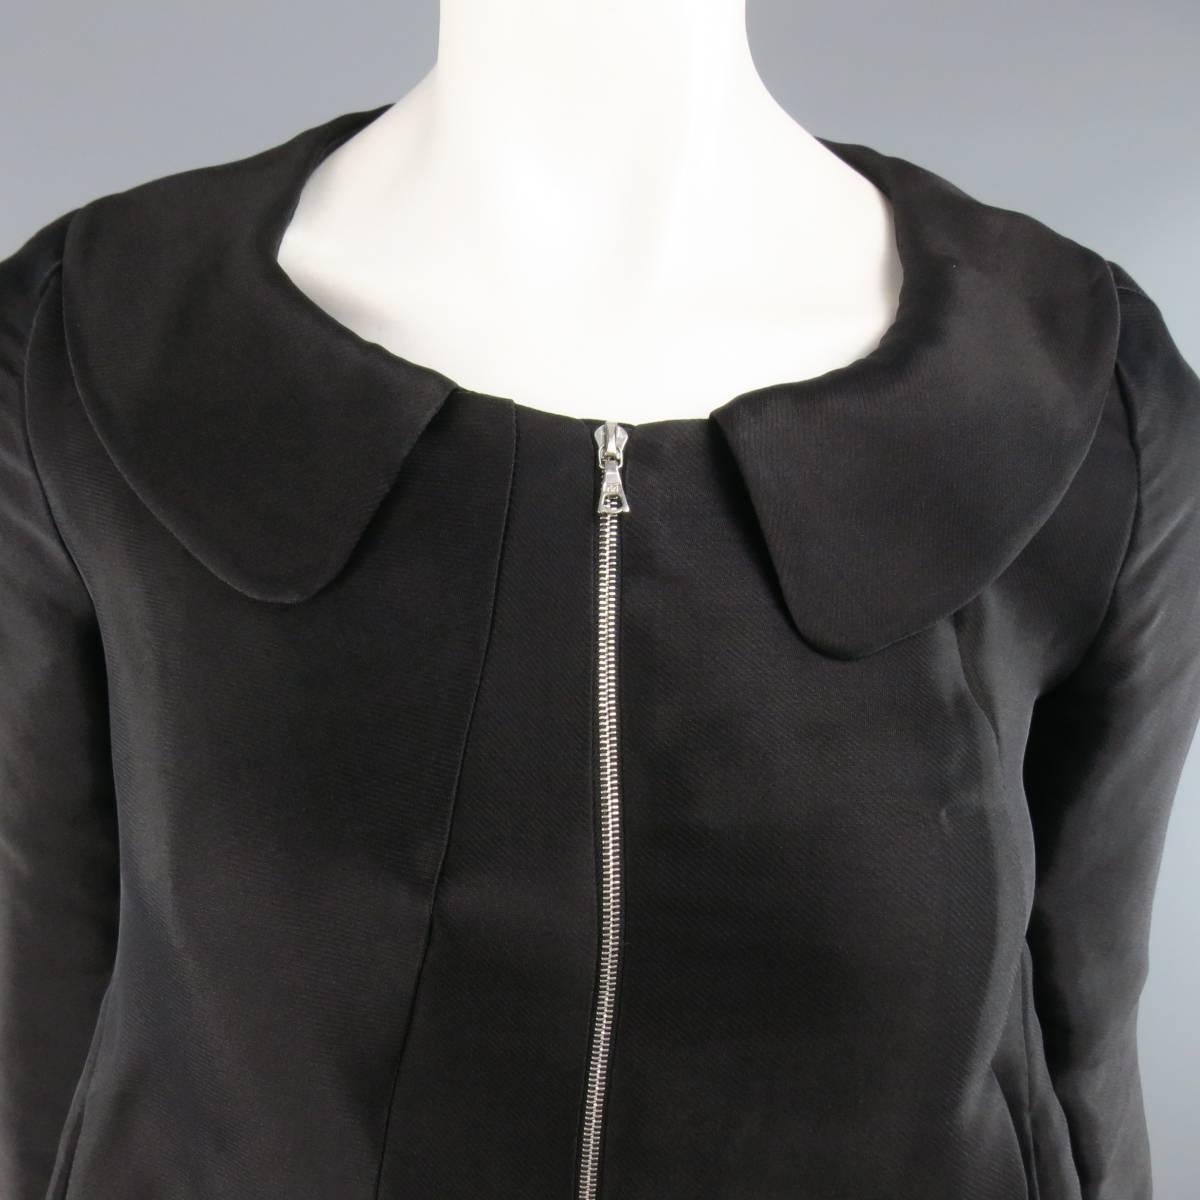 MARNI black silk linen blend jacket features a wide club collar, cropped three-quarter length sleeves, asymmetrical pleating, double zipper closure, ruffled, cropped hem in the back. Made in Italy.
 
Excellent Pre-Owned Condition.
Marked: 38 IT.
